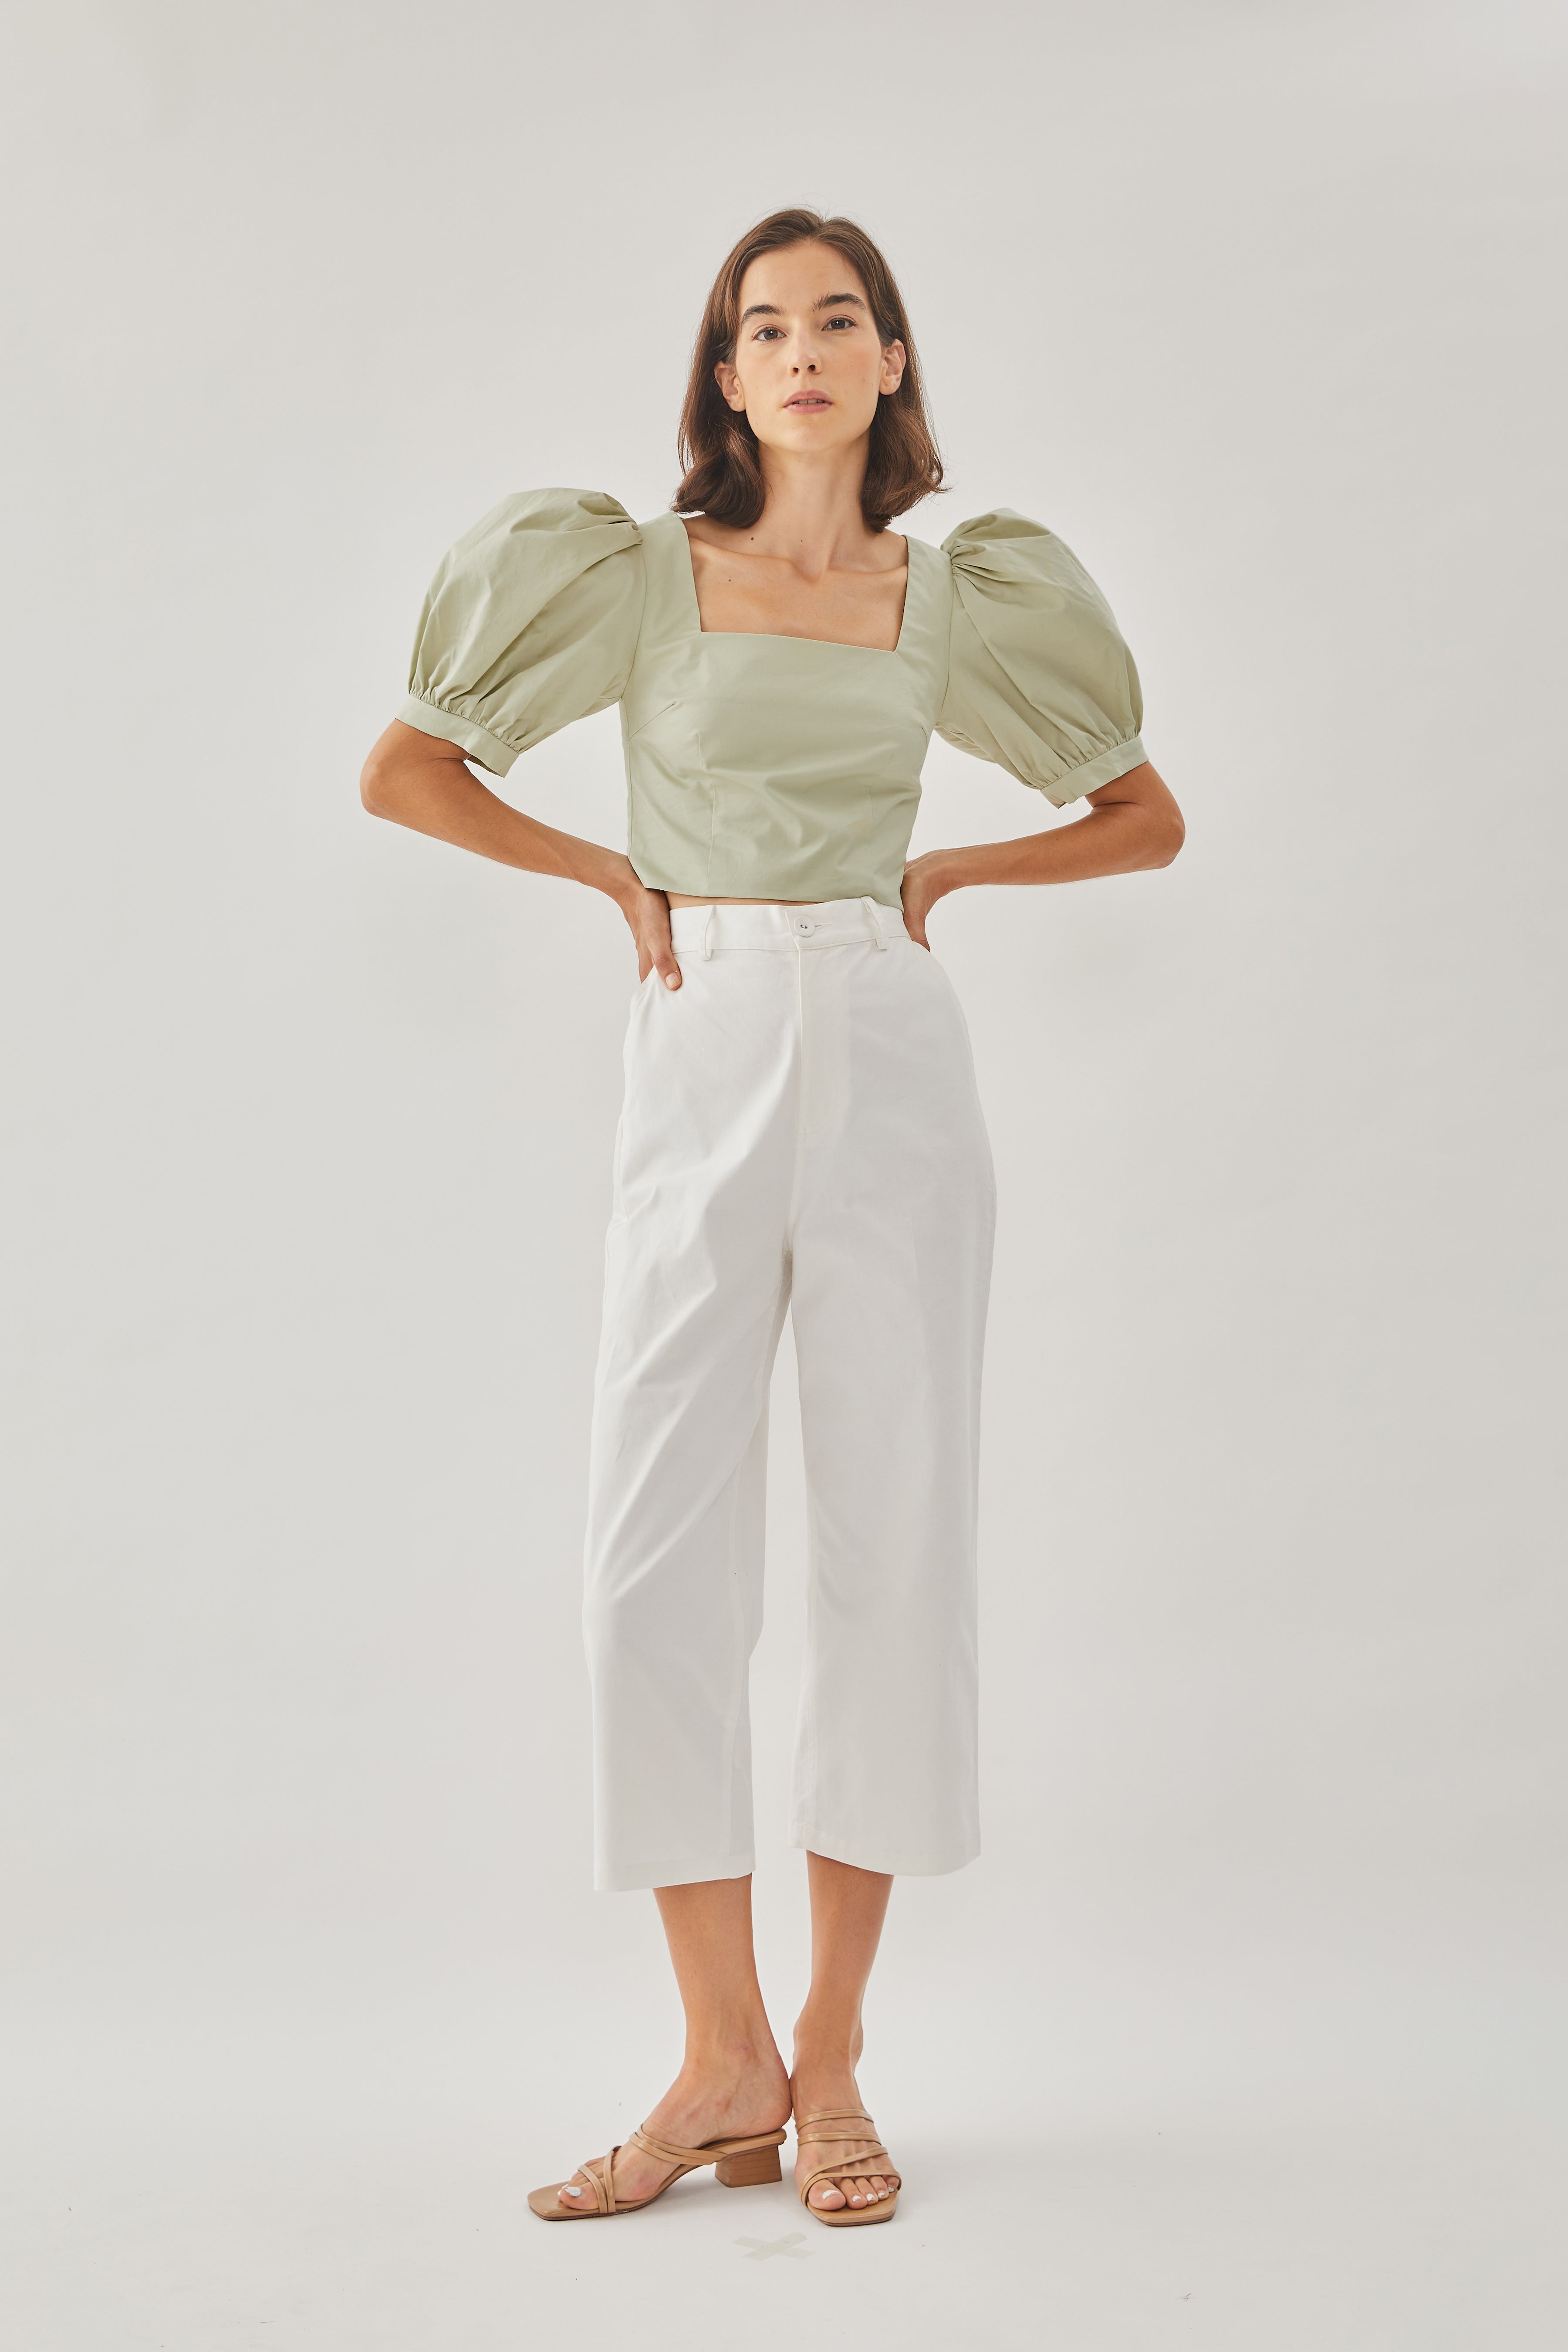 Cotton Cropped Puffed Sleeved Top in Sea Mist